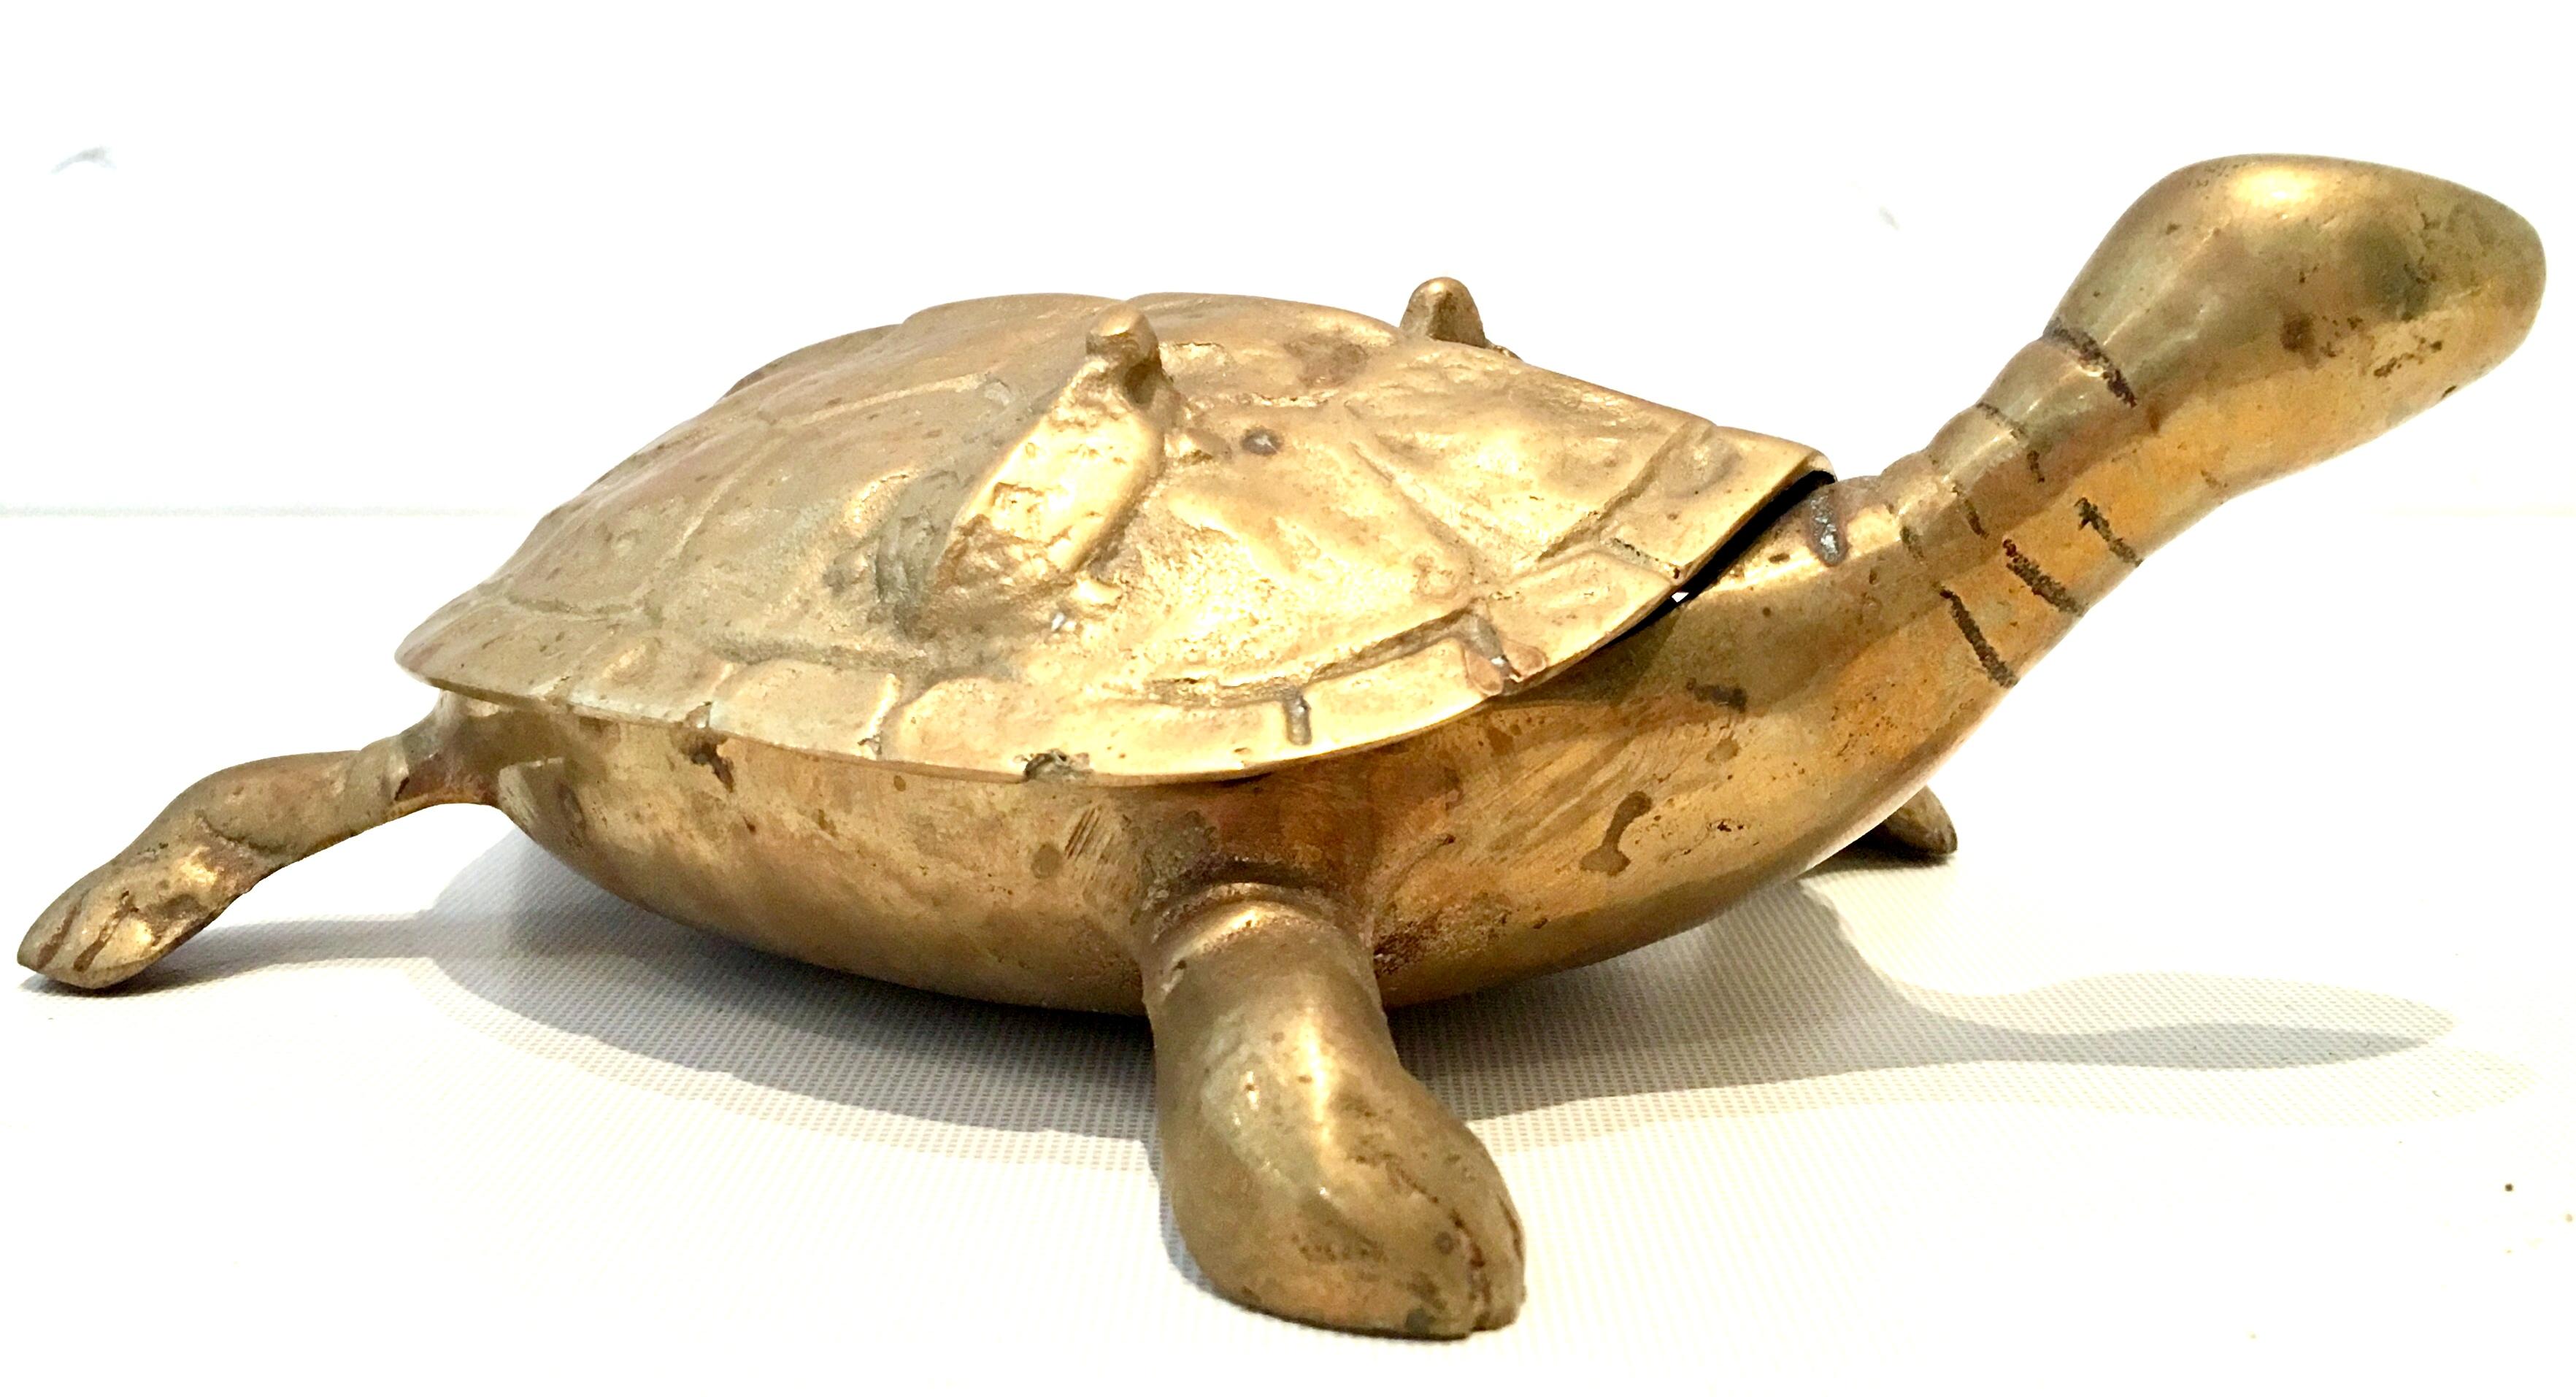 20th century solid brass large turtle lidded box. Features a Chinese symbol oh the interior bottom with great attention to detail and two abstract baby turtles on the top lid.